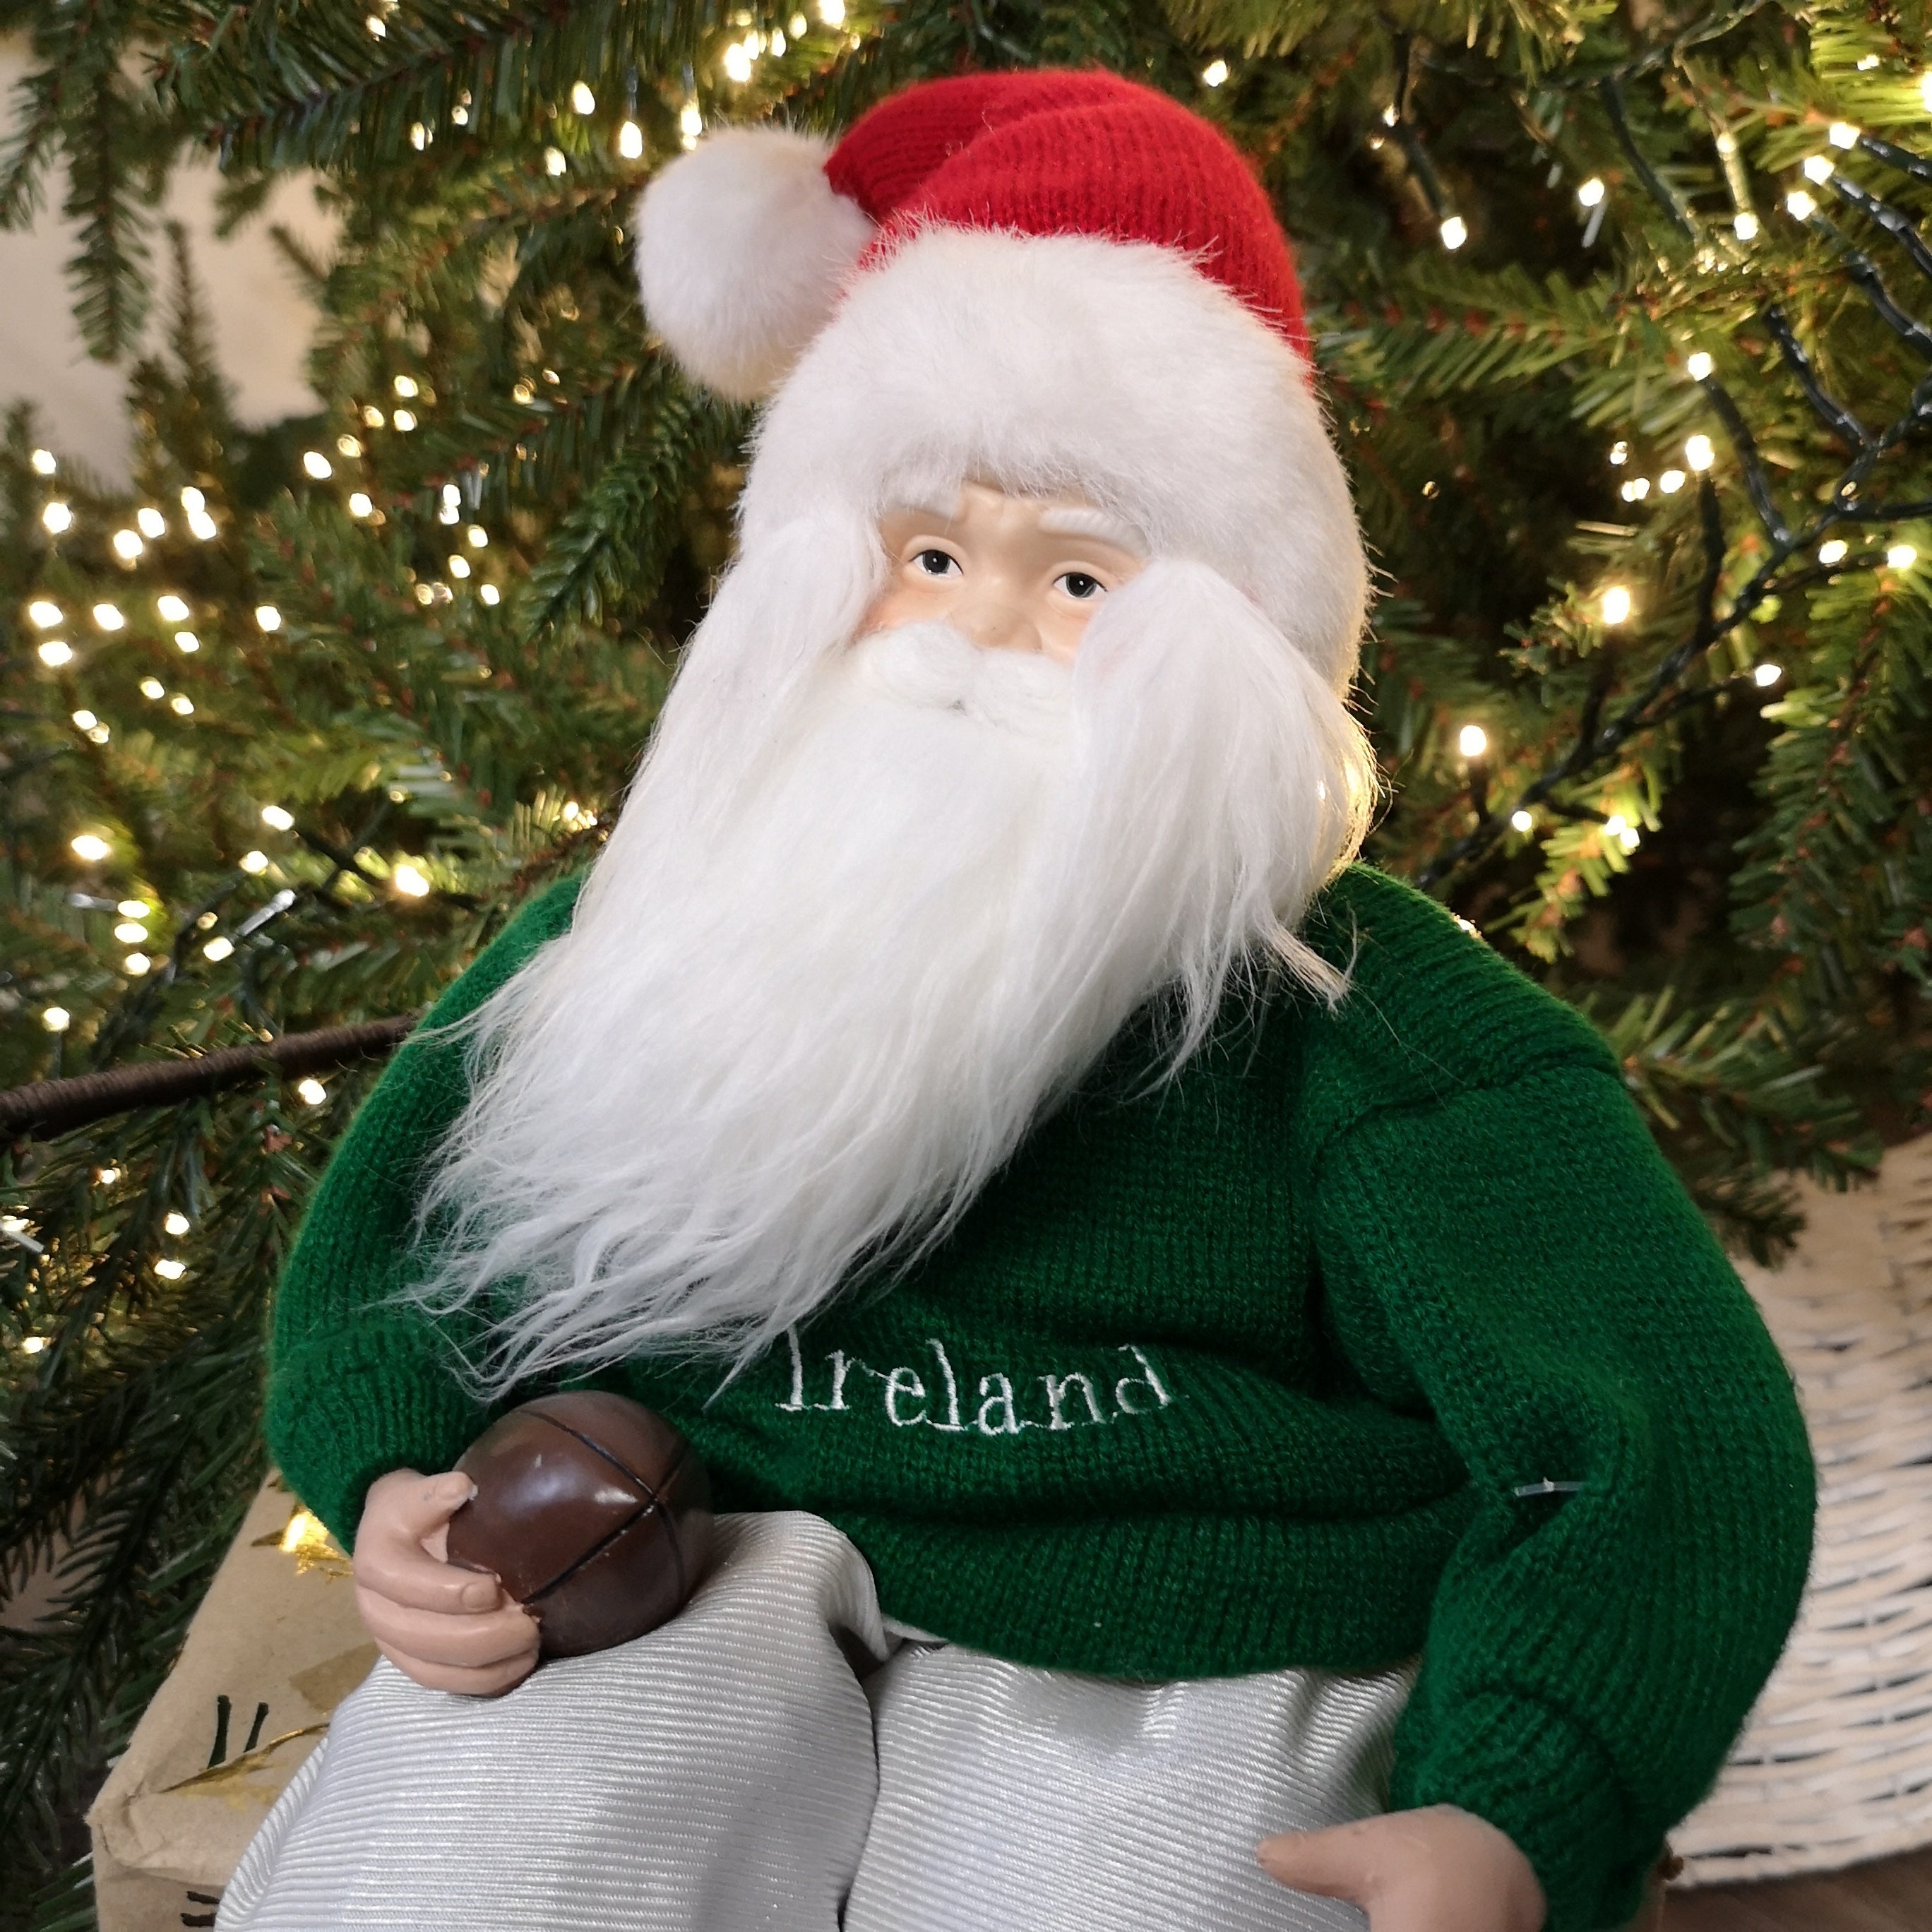 40cm Sitting Ireland Rugby Santa Claus Father Christmas Decoration in Green